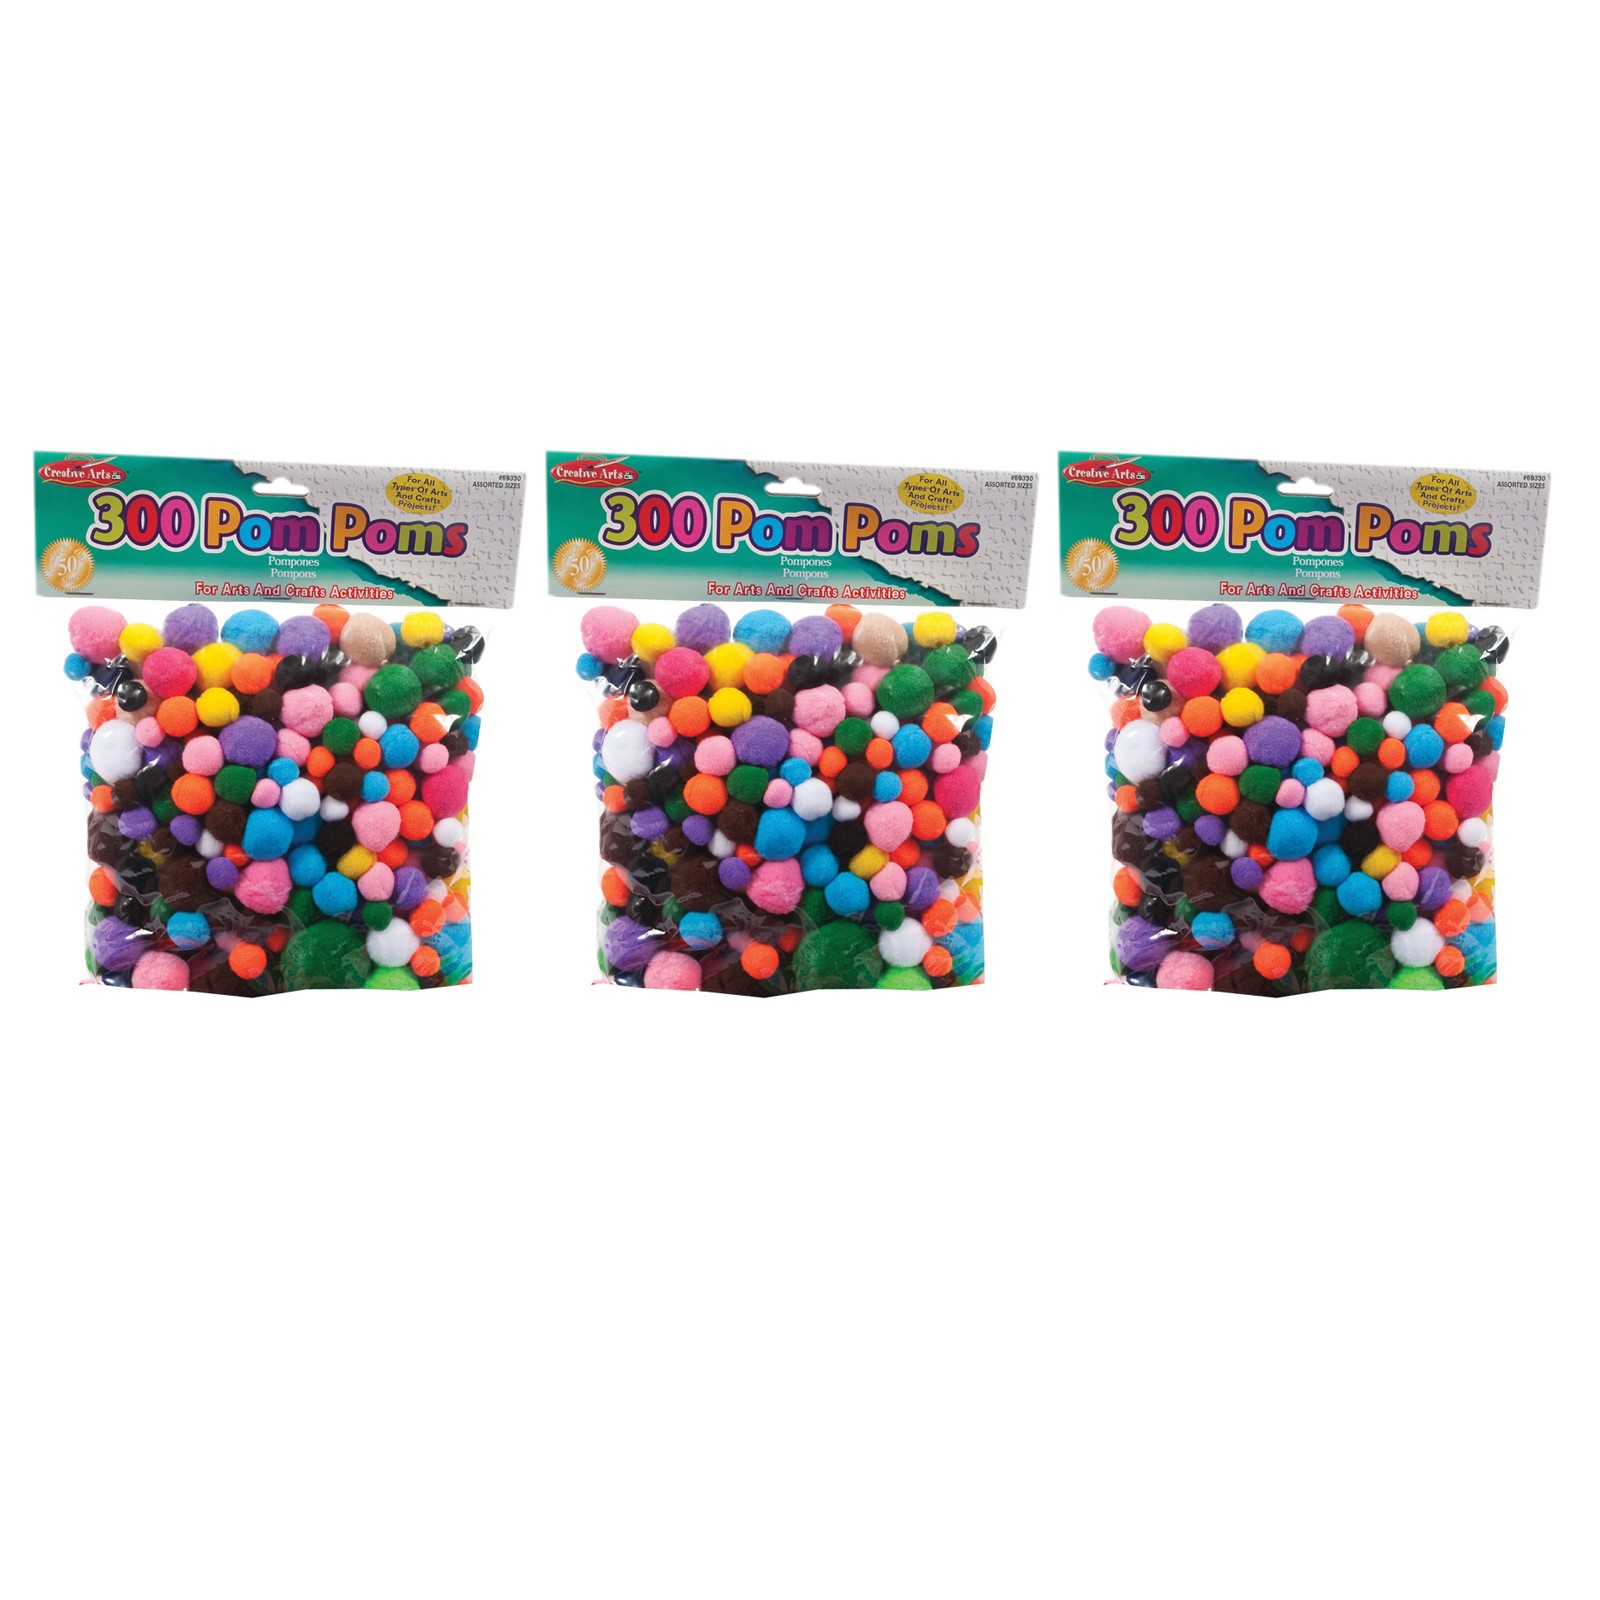 Creative Arts Pom-Poms, Assorted Colors/Sizes, 300 Per Pack, 3 Packs